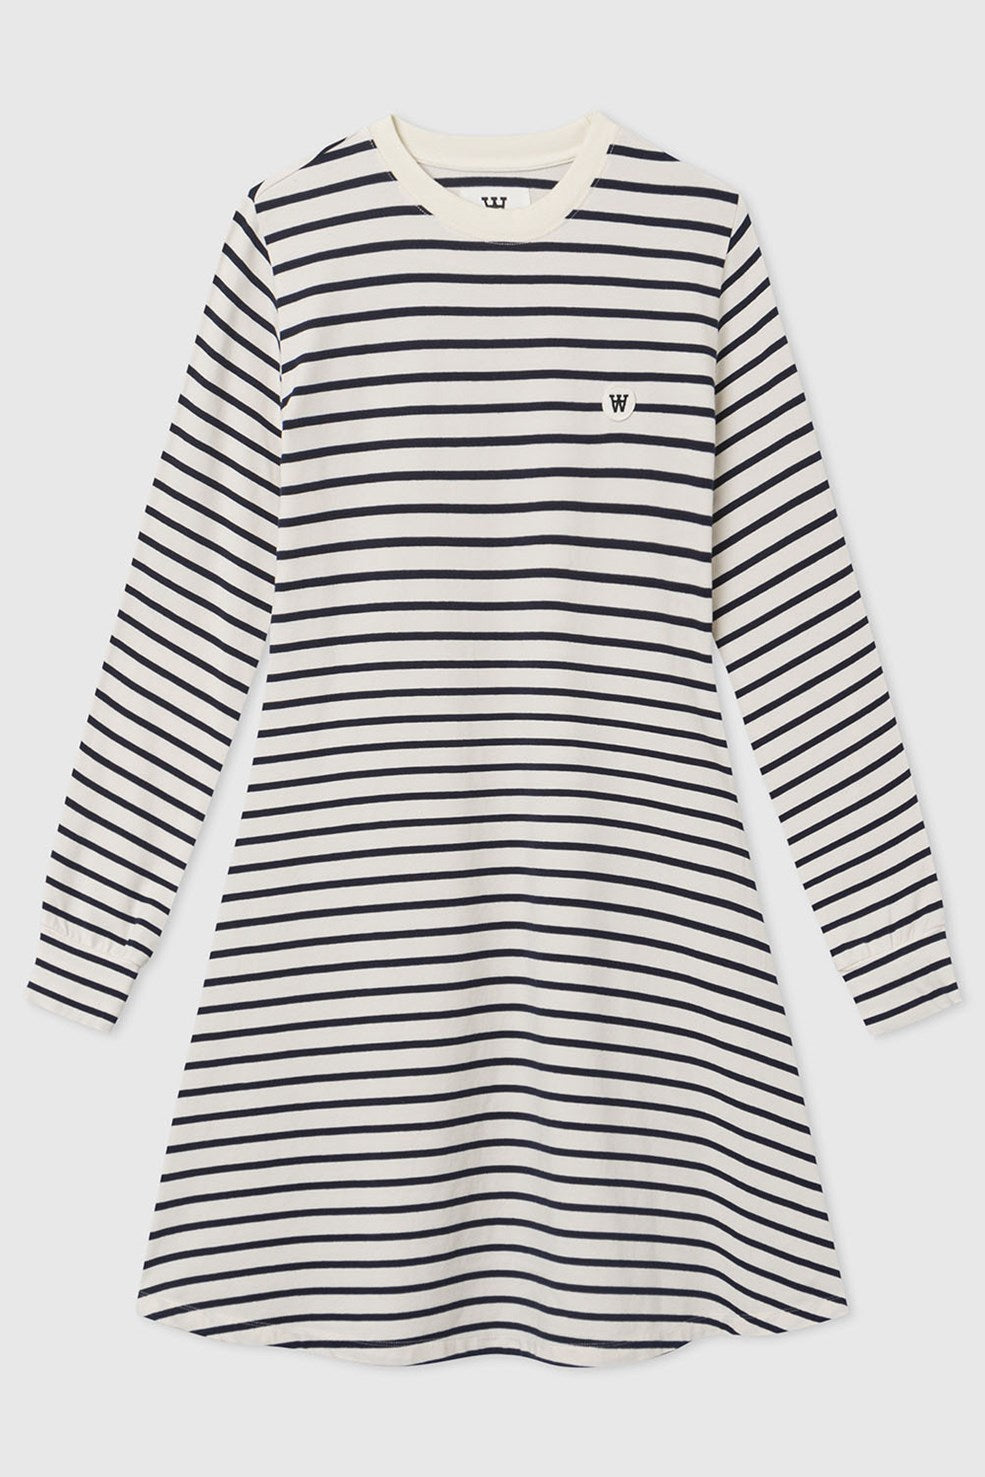 NAVY STRIPED DRESS BY WOOD WOOD